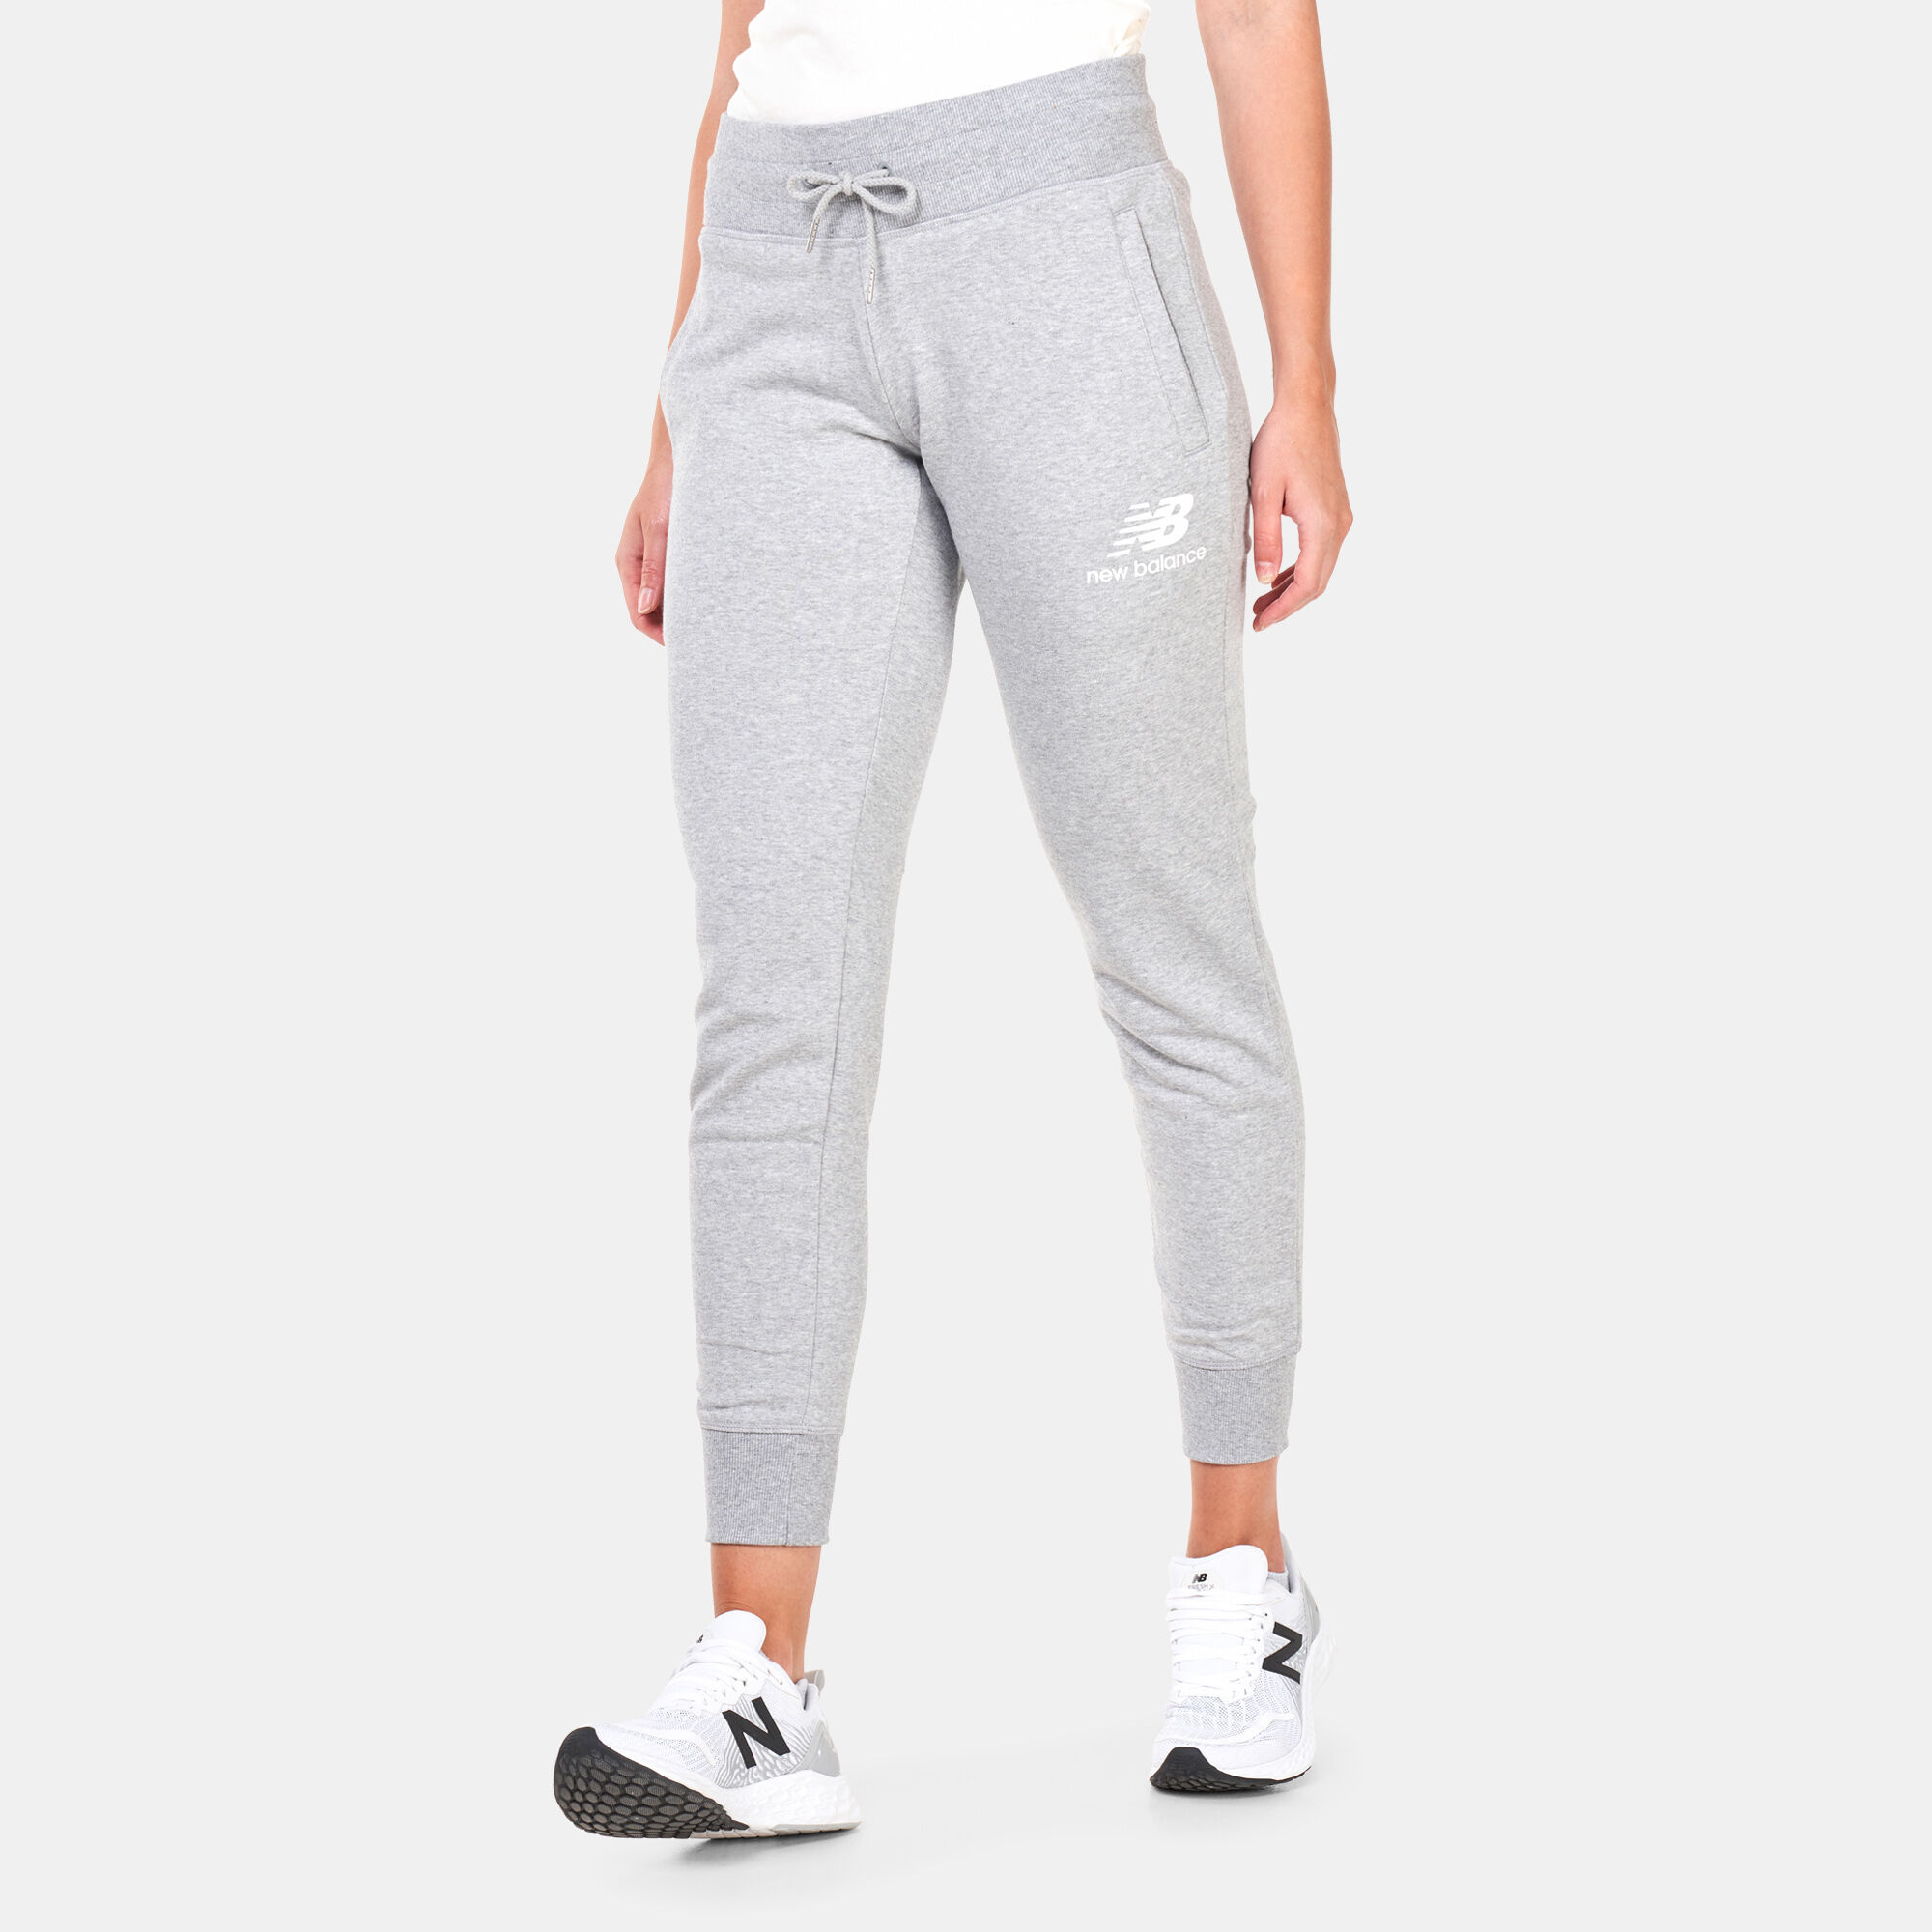 Buy New Balance Women's Essentials French Terry Sweatpants Blue in KSA -SSS